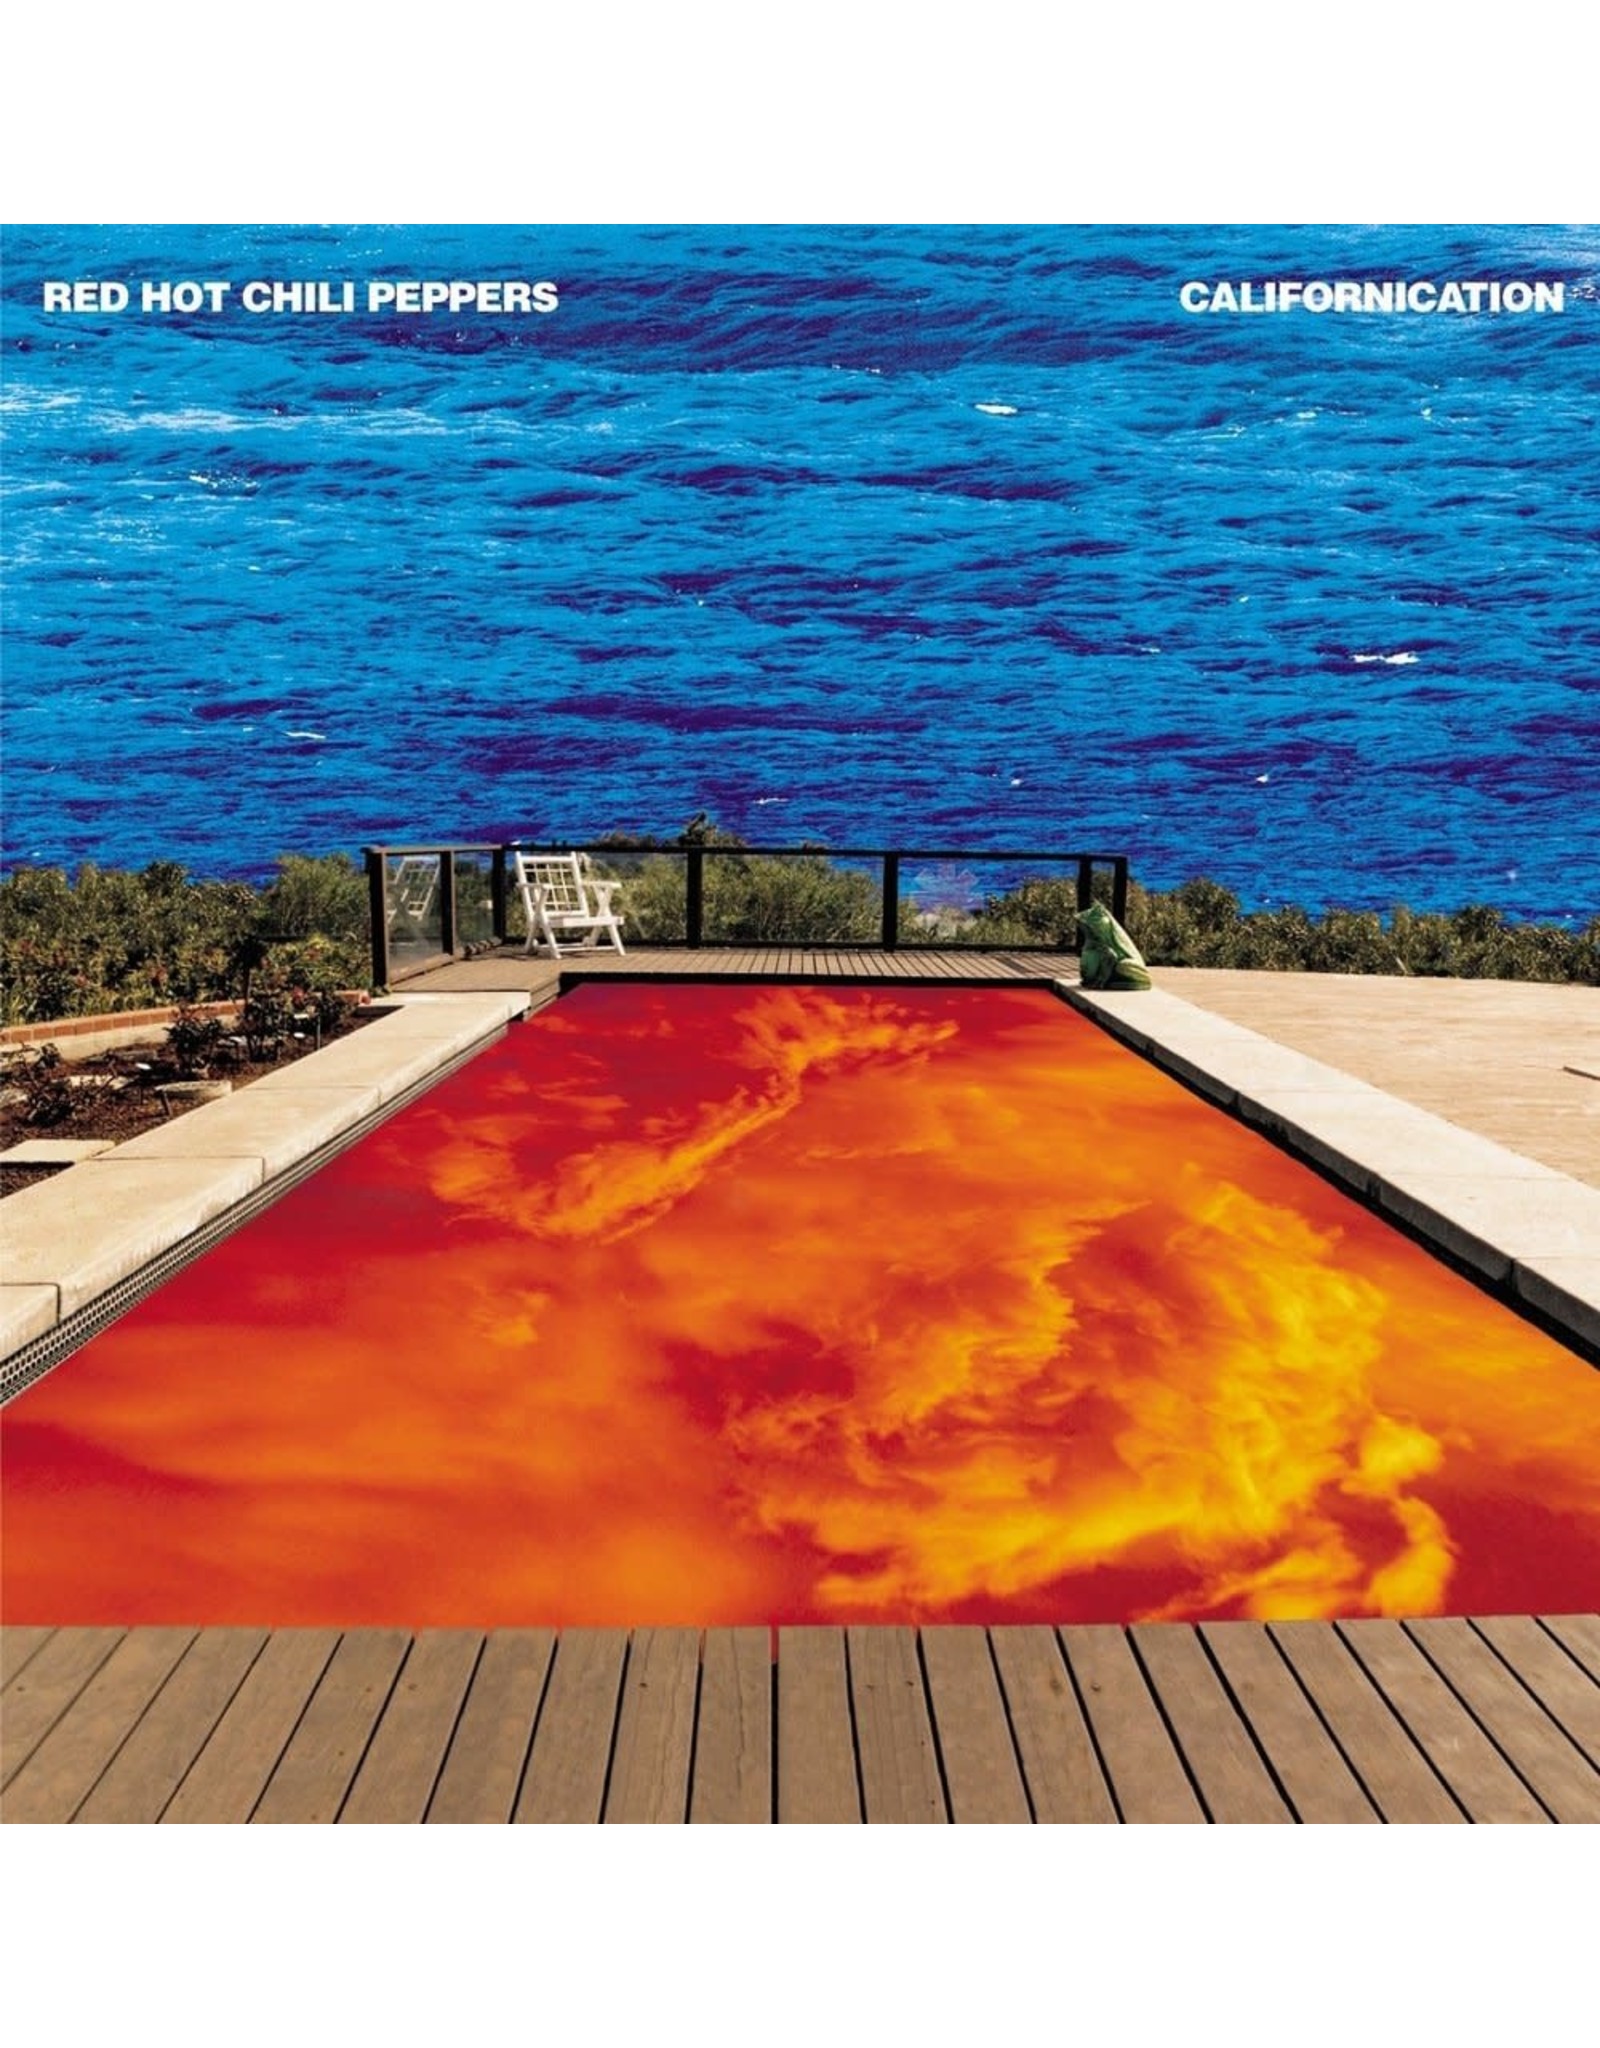 Red Hot Chili Peppers - Californication (20th Anniversary) (Picture Disc)